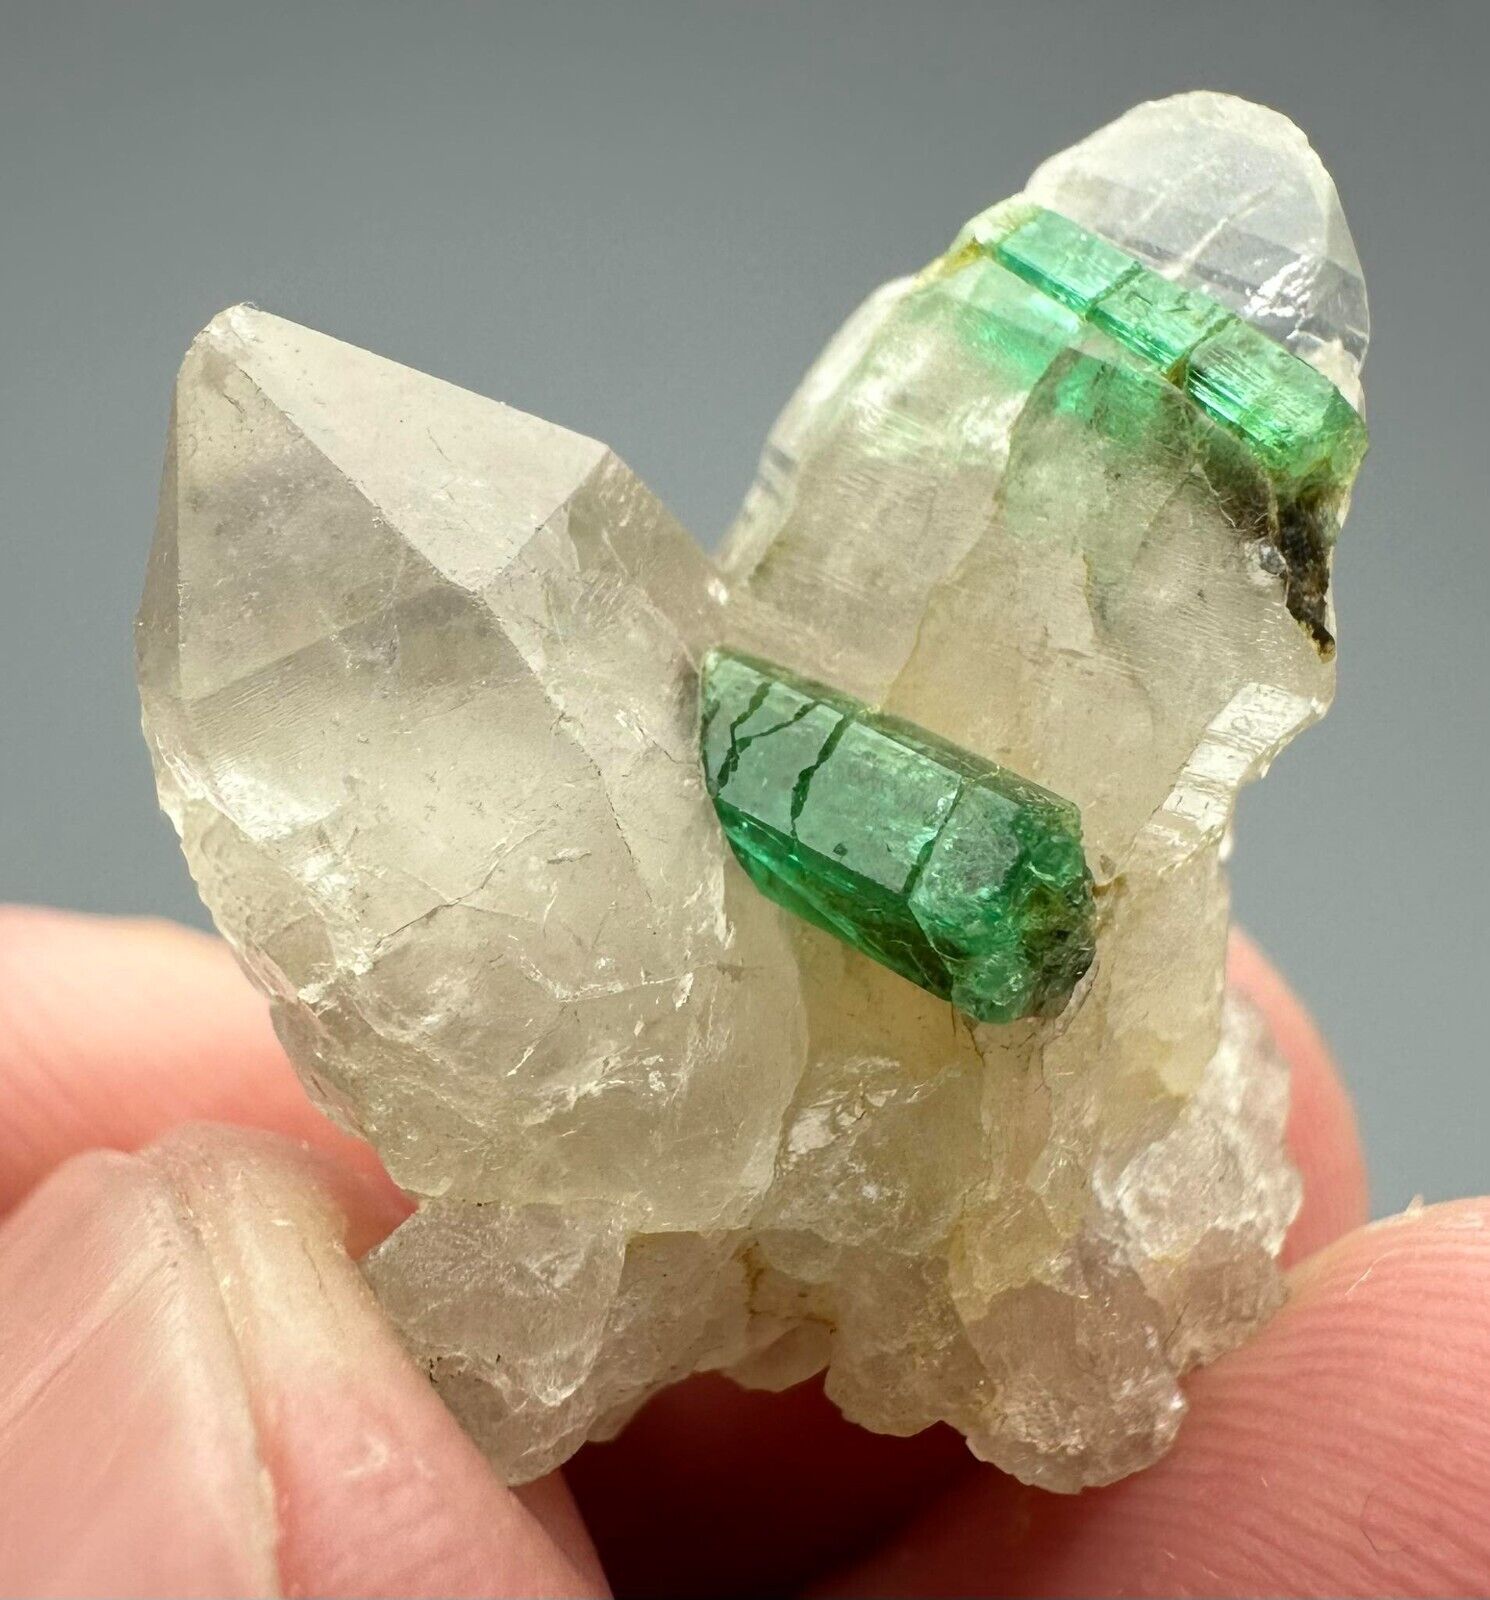 23 Ct. Well terminated Top Green Panjsher Emerald Crystal On Quartz Crystals